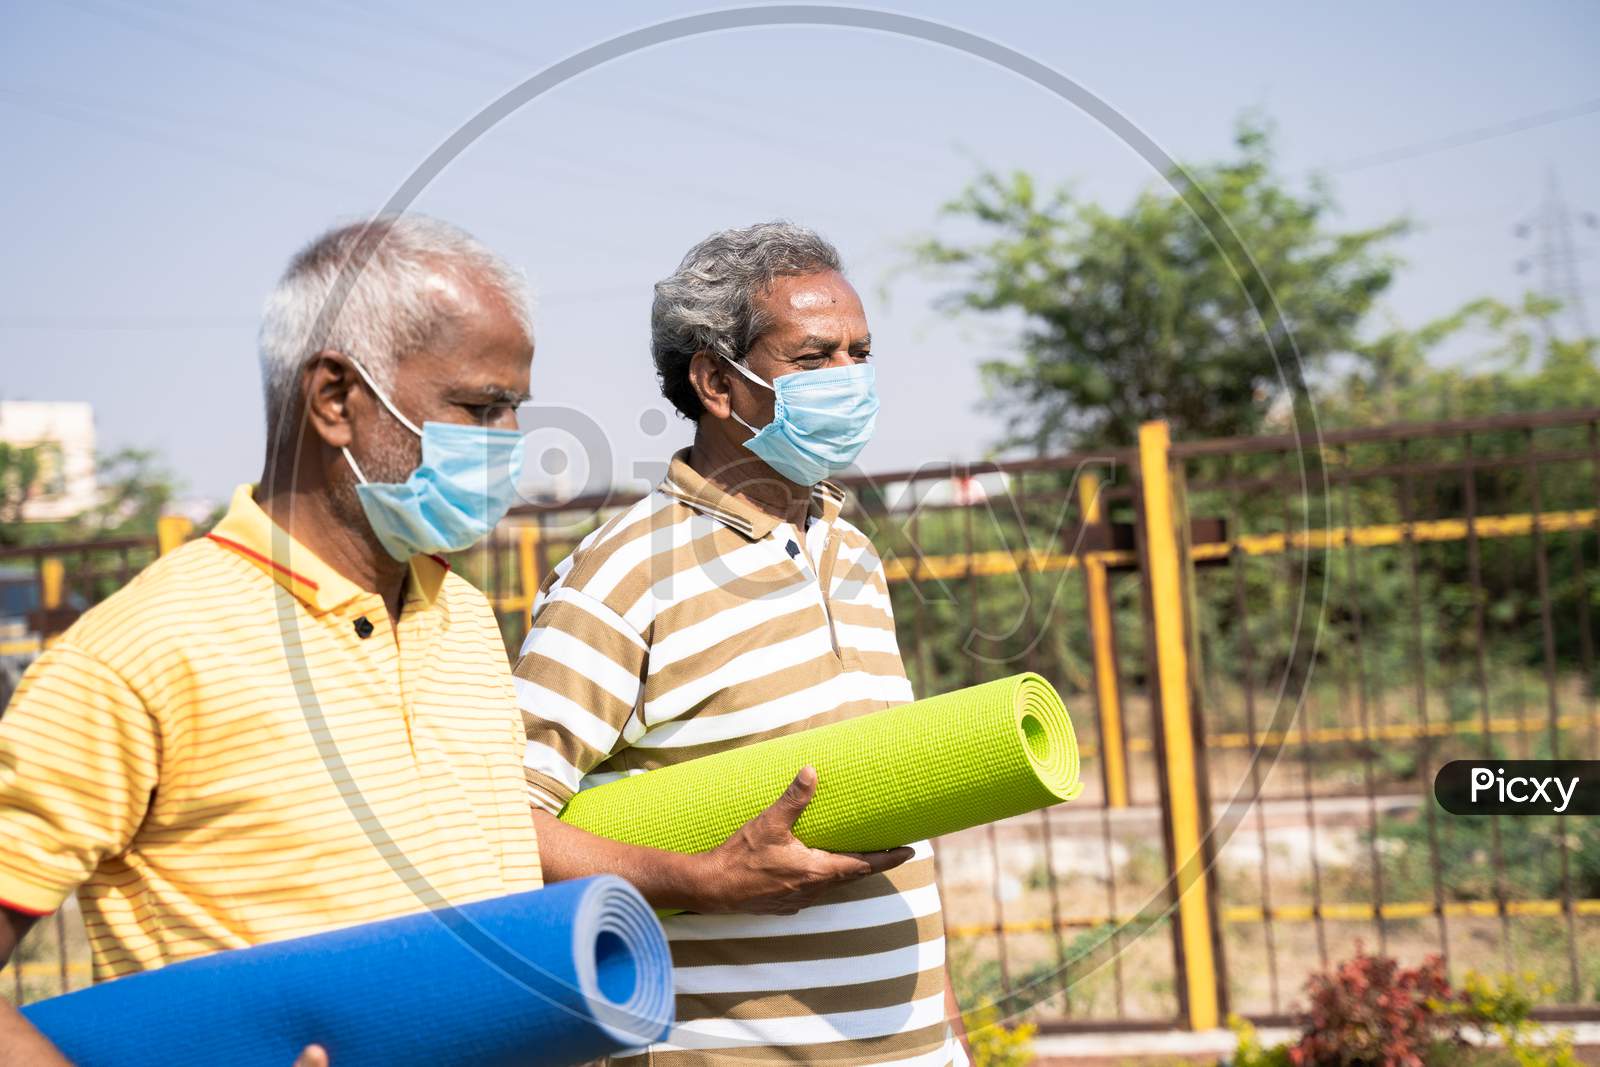 Two Senior Men With Medical Face Mask Holding Yoga Mat Coming To Park For Exercising During Morning - Concept Of New Normal Healthcare And Fitness During Coronavirus Covid-19 Pandemic.